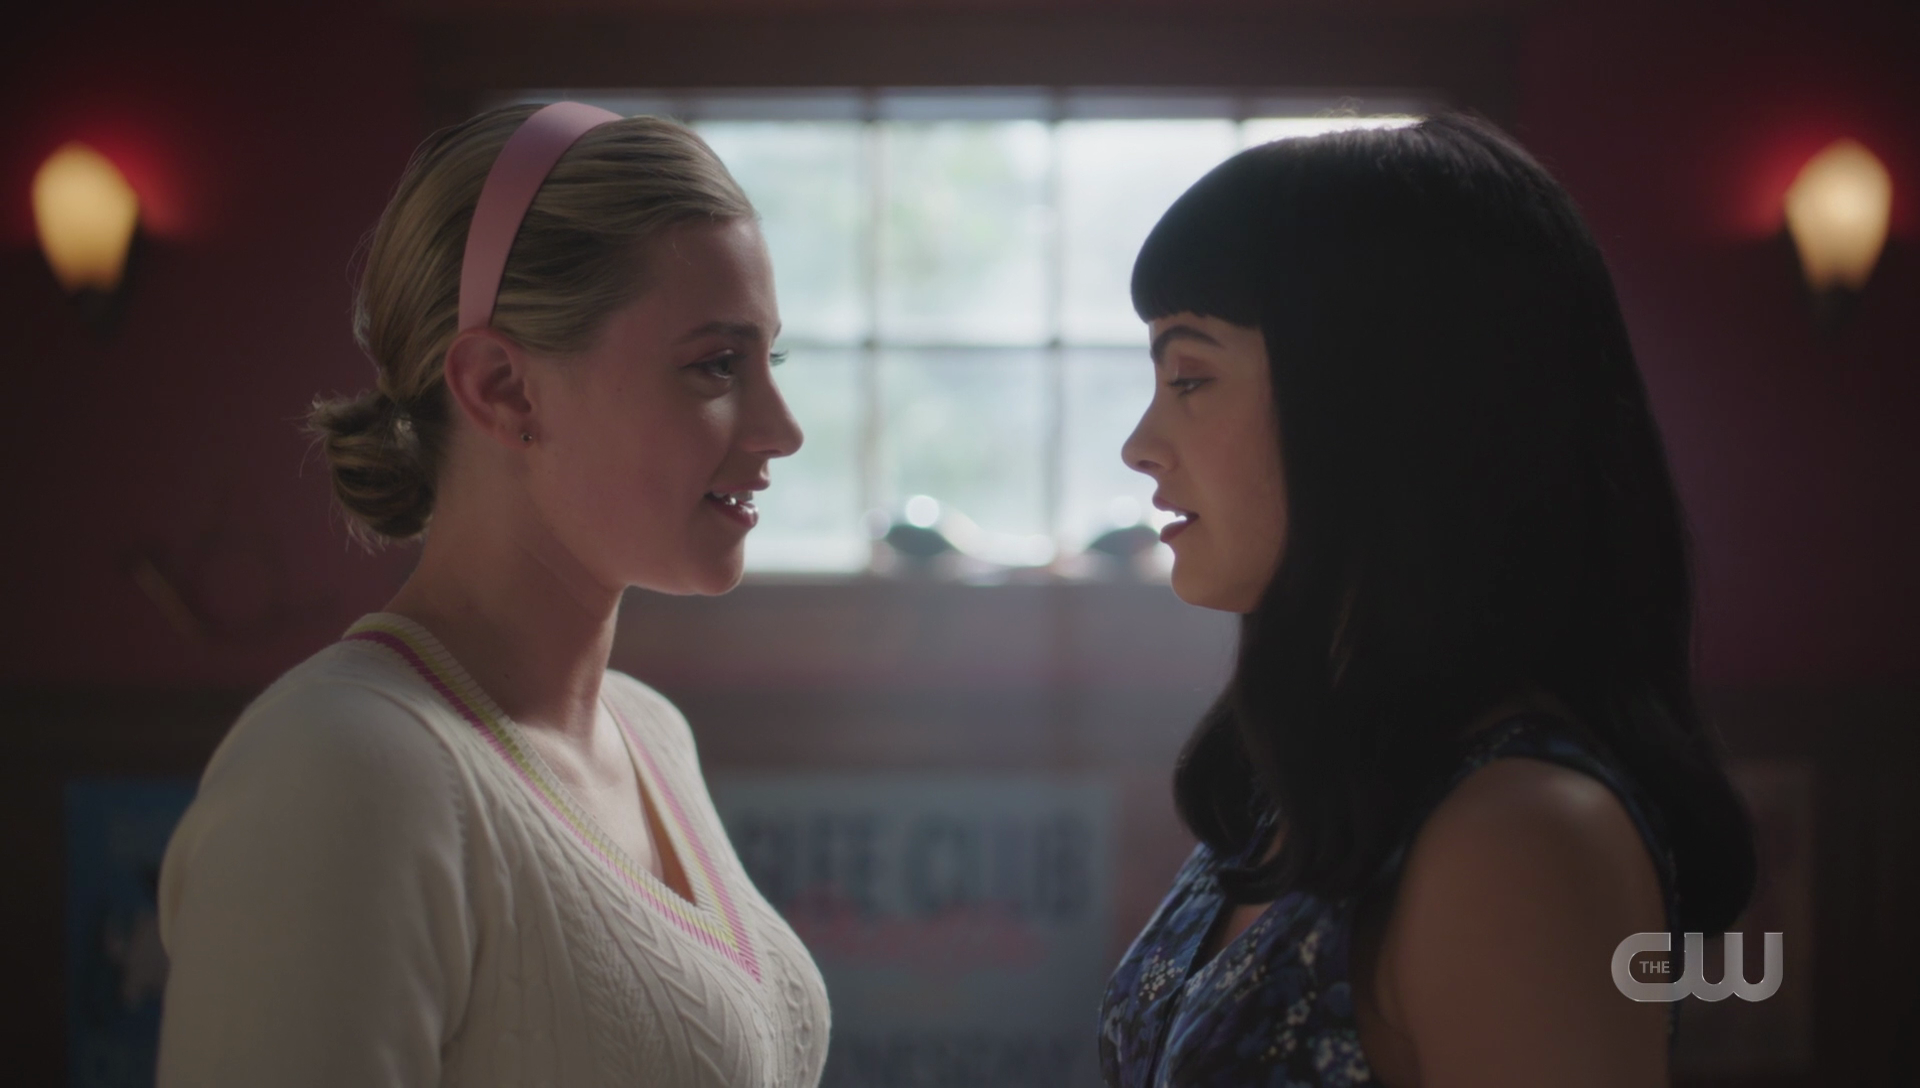 Riverdale: 10 Worst Things That Happened To Betty